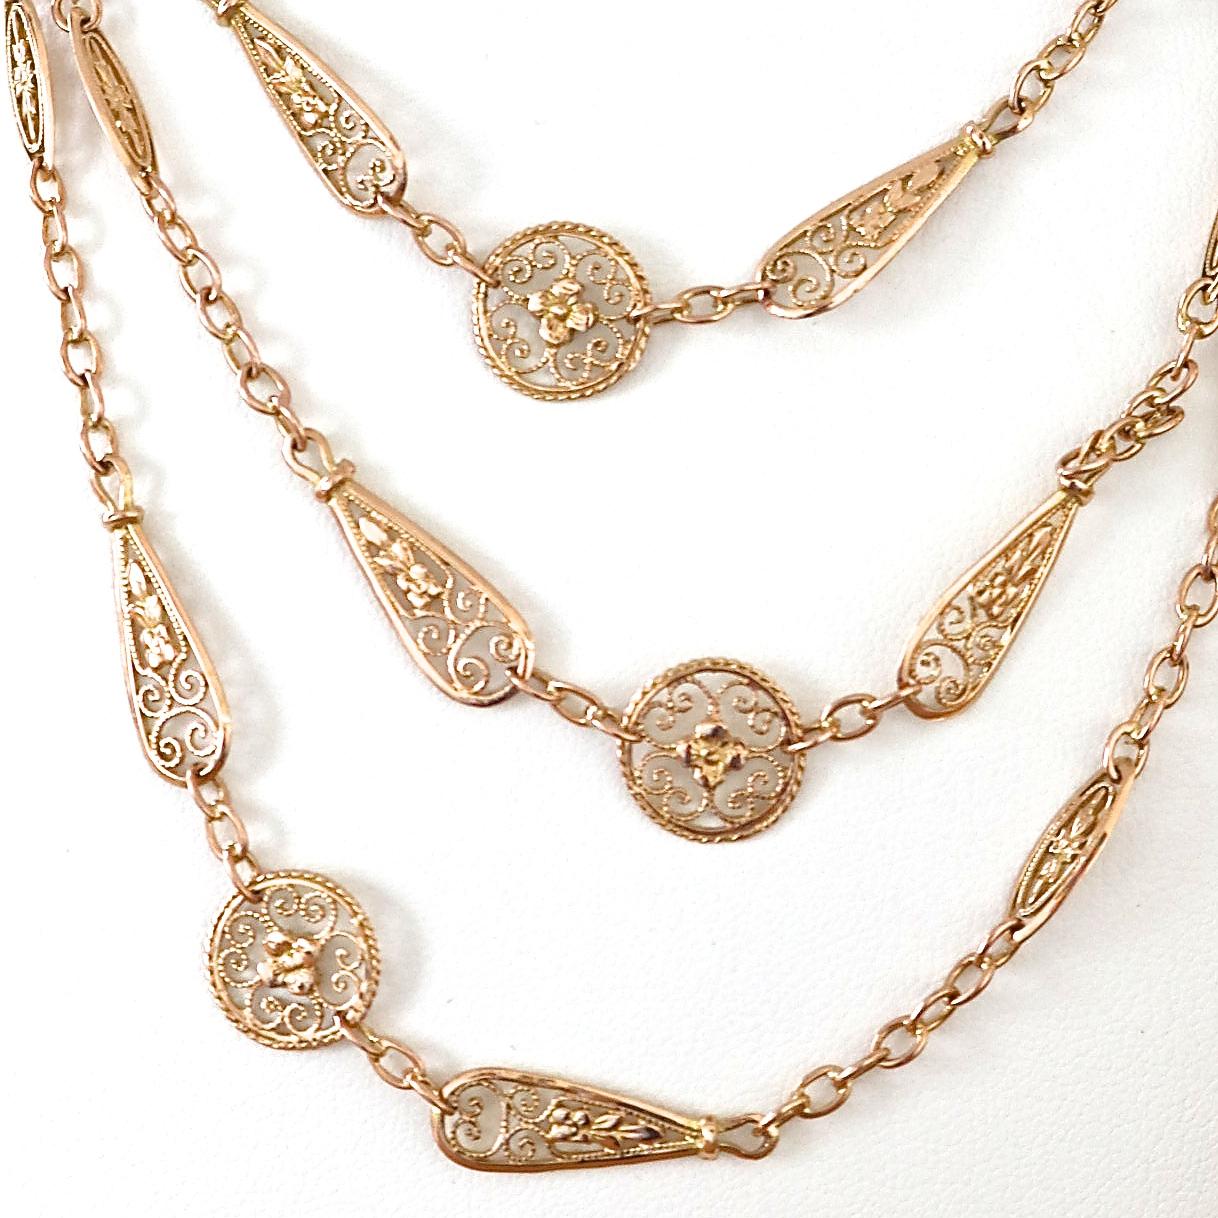 Luxurious Antique French 18k gold necklace with unique chain links and ornamental round and tapered stations. The length is 46 inches and is great for layering or as a stand alone adornment. 